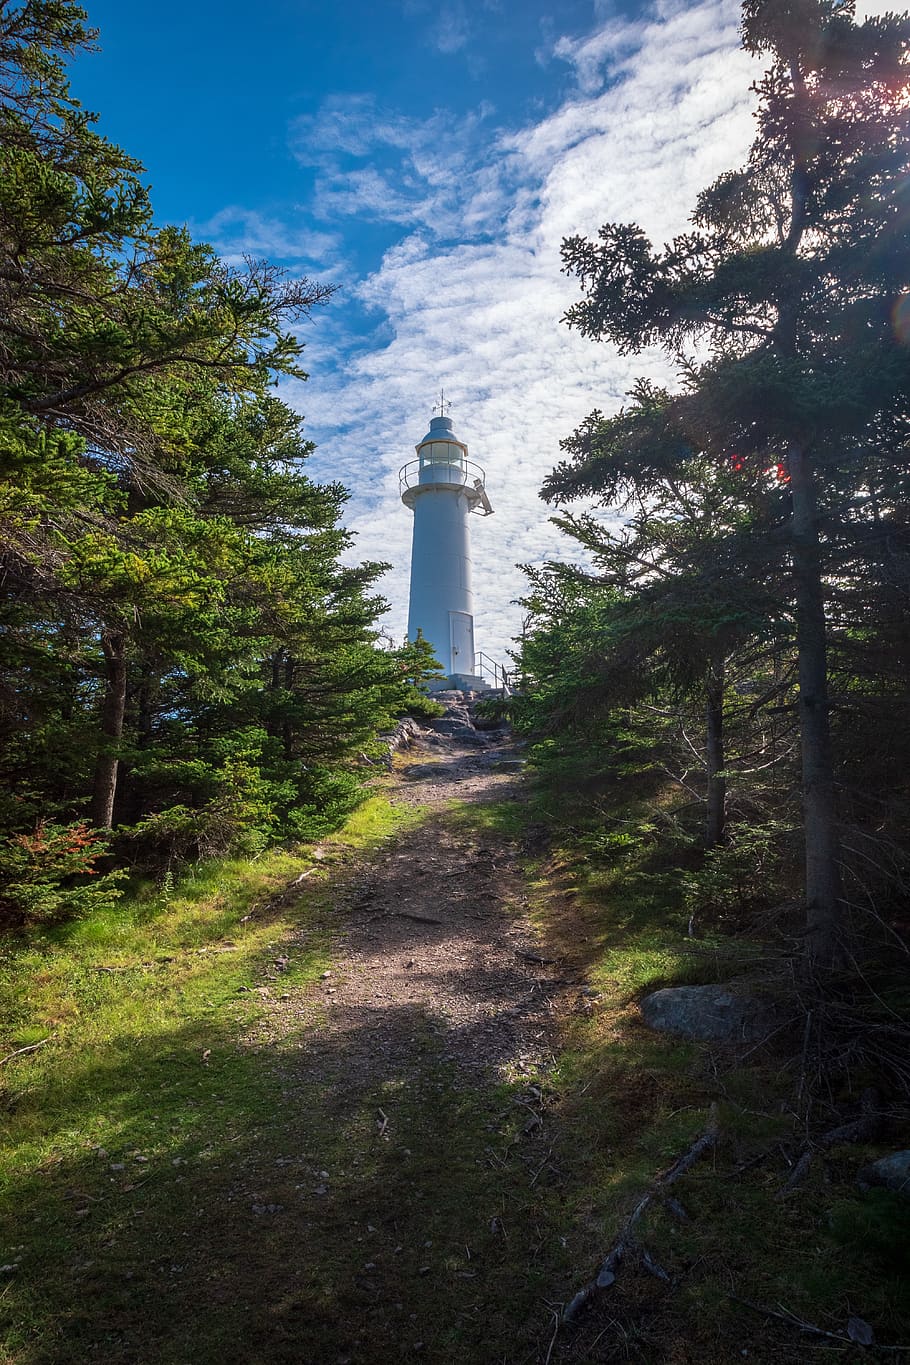 newfoundland, canada, kings cove, lighthouse, travel, nature, forest, trees, path, rest